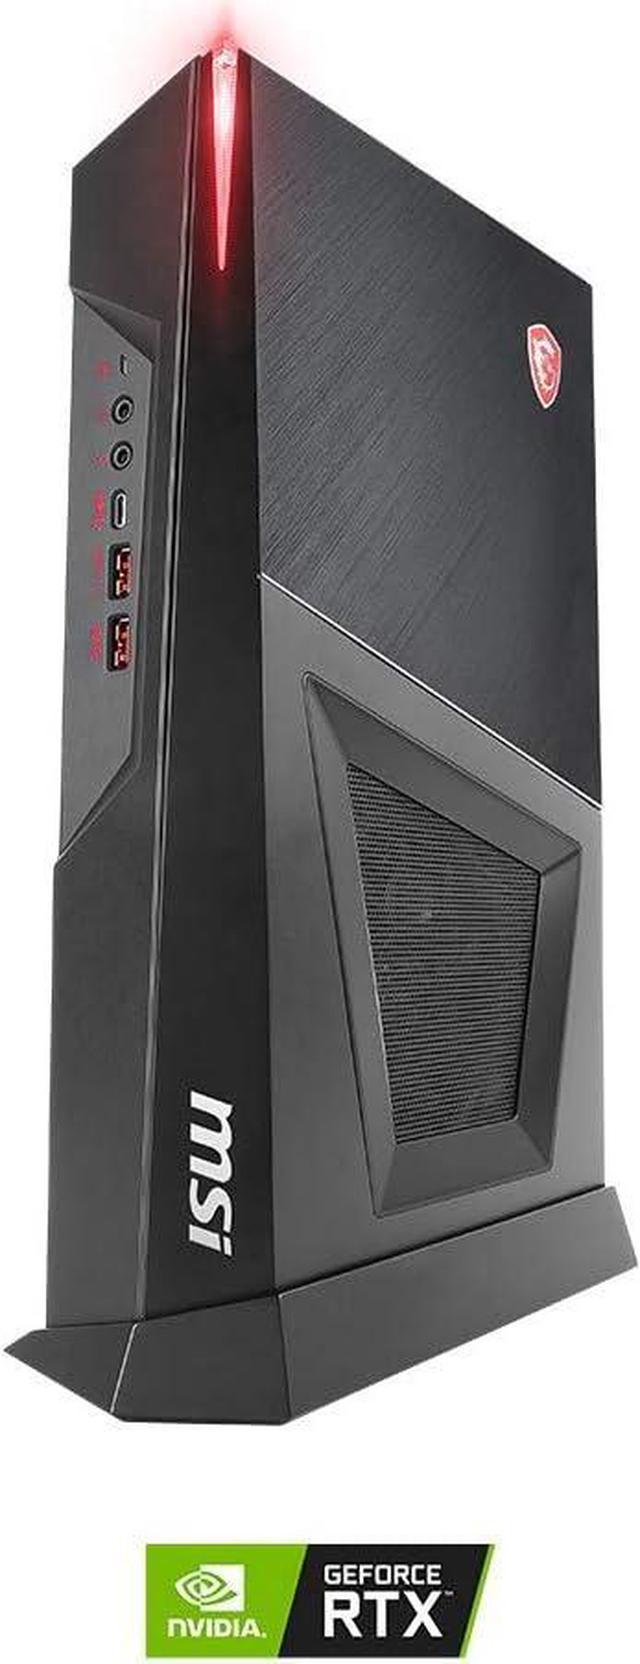 MSI - Unité centrale MPG Trident A 11TC-2057FR / i7-11700F / 32 Go / 512 Go  SSD + 1 To HDD / RTX 3060